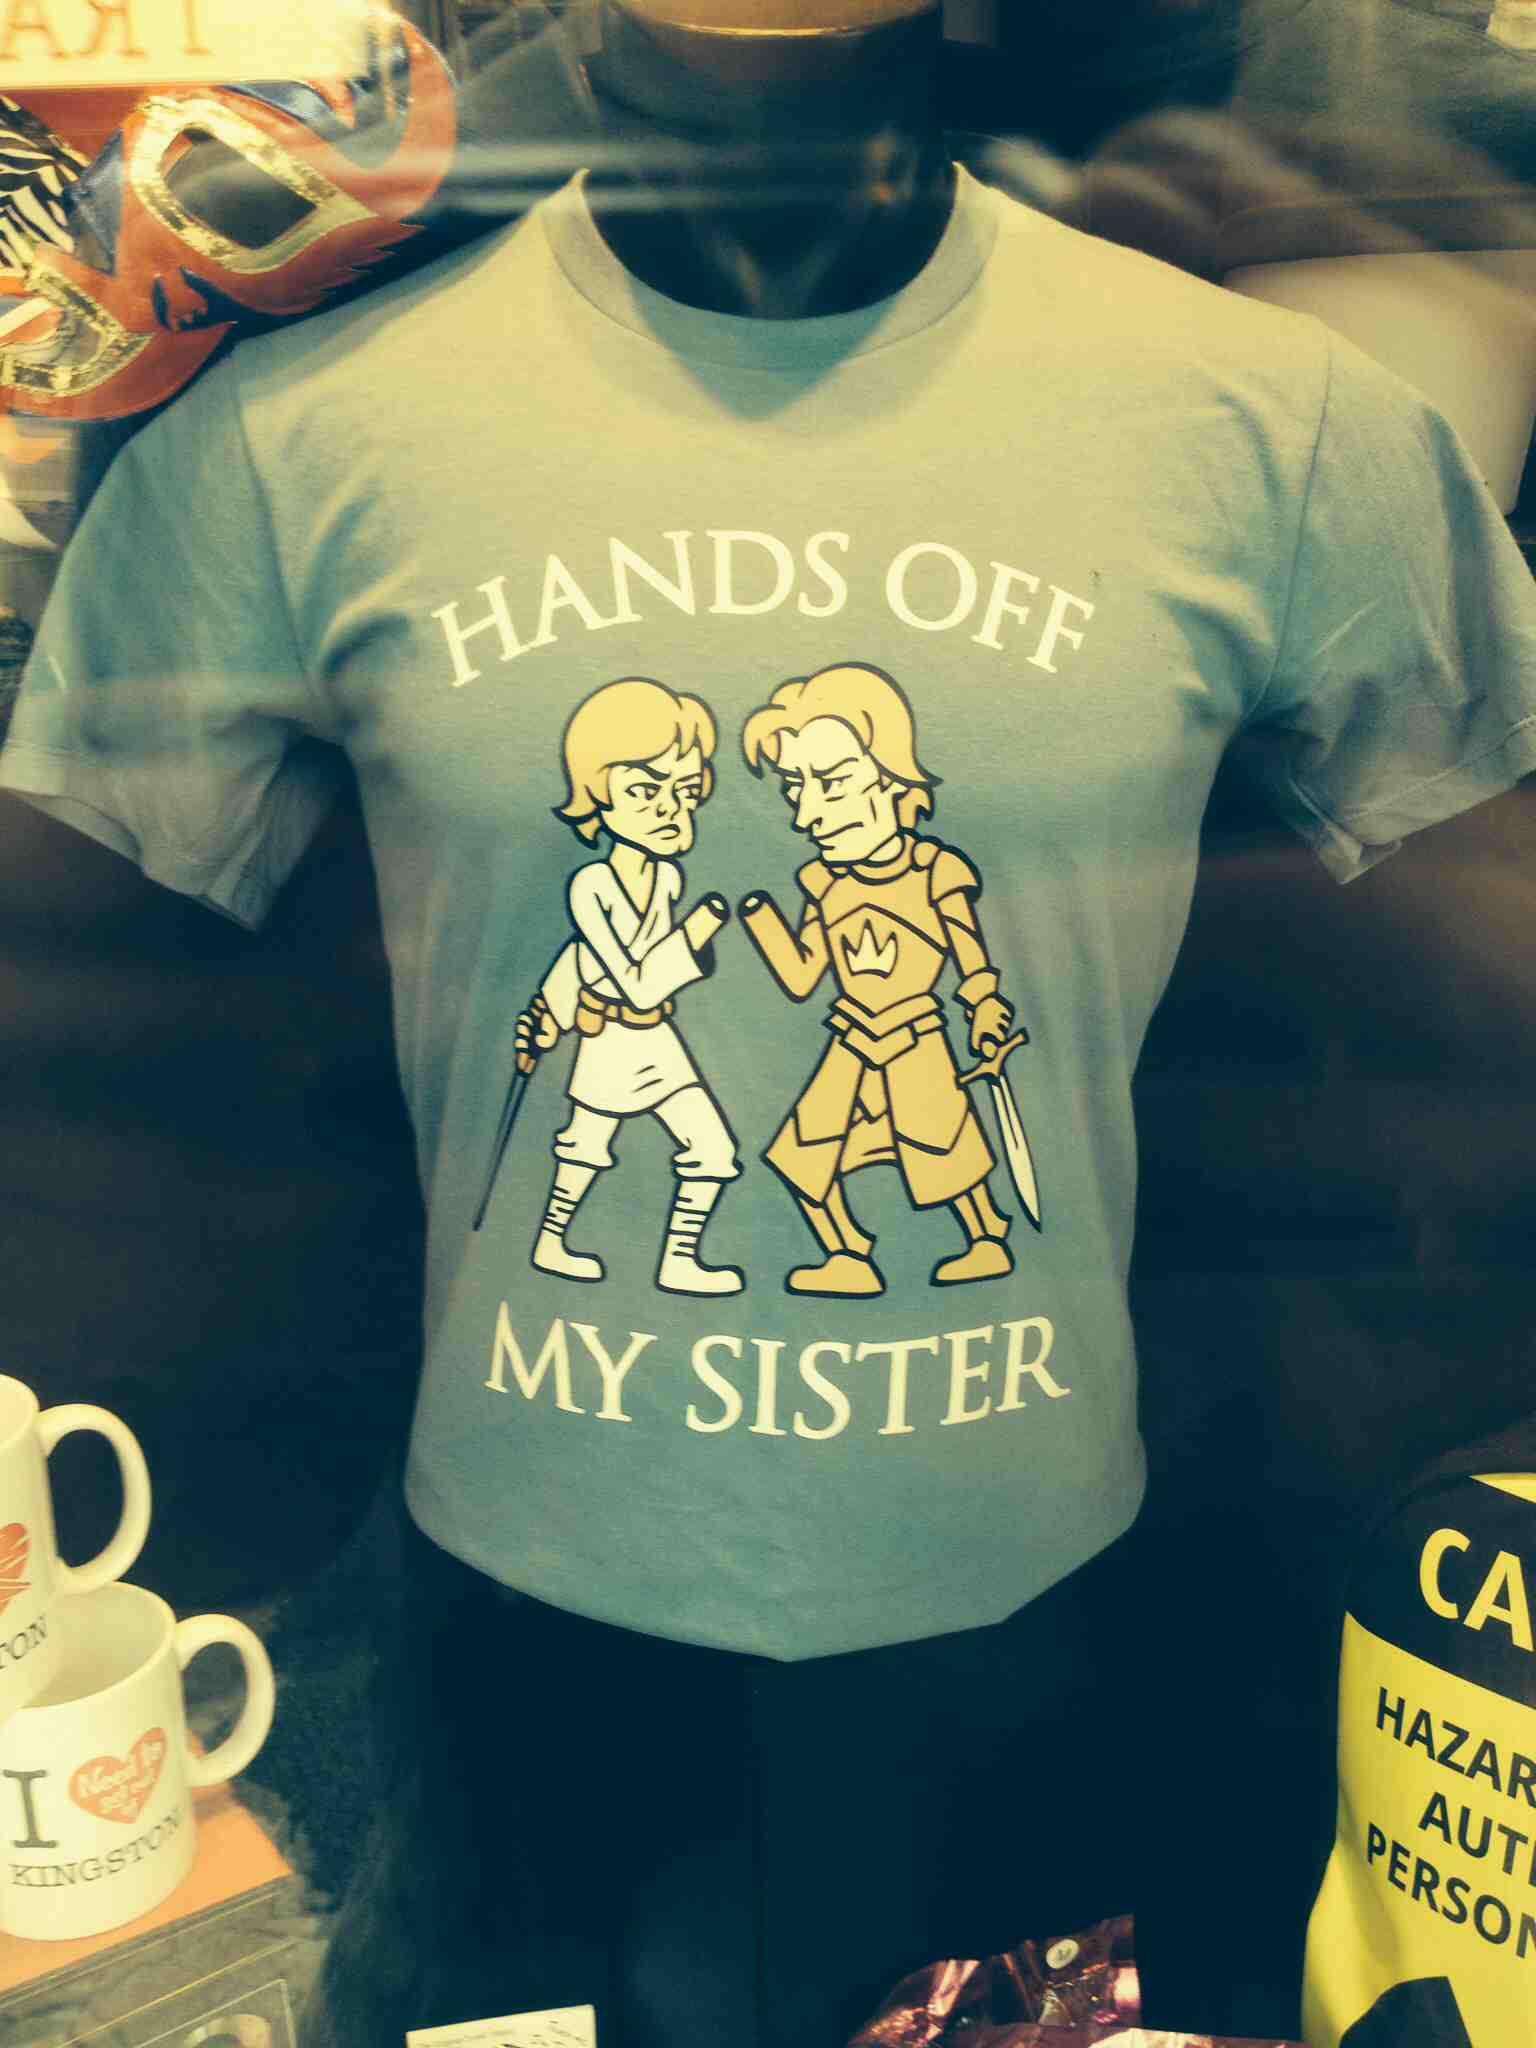 Get your hands off my sister! -   Misc